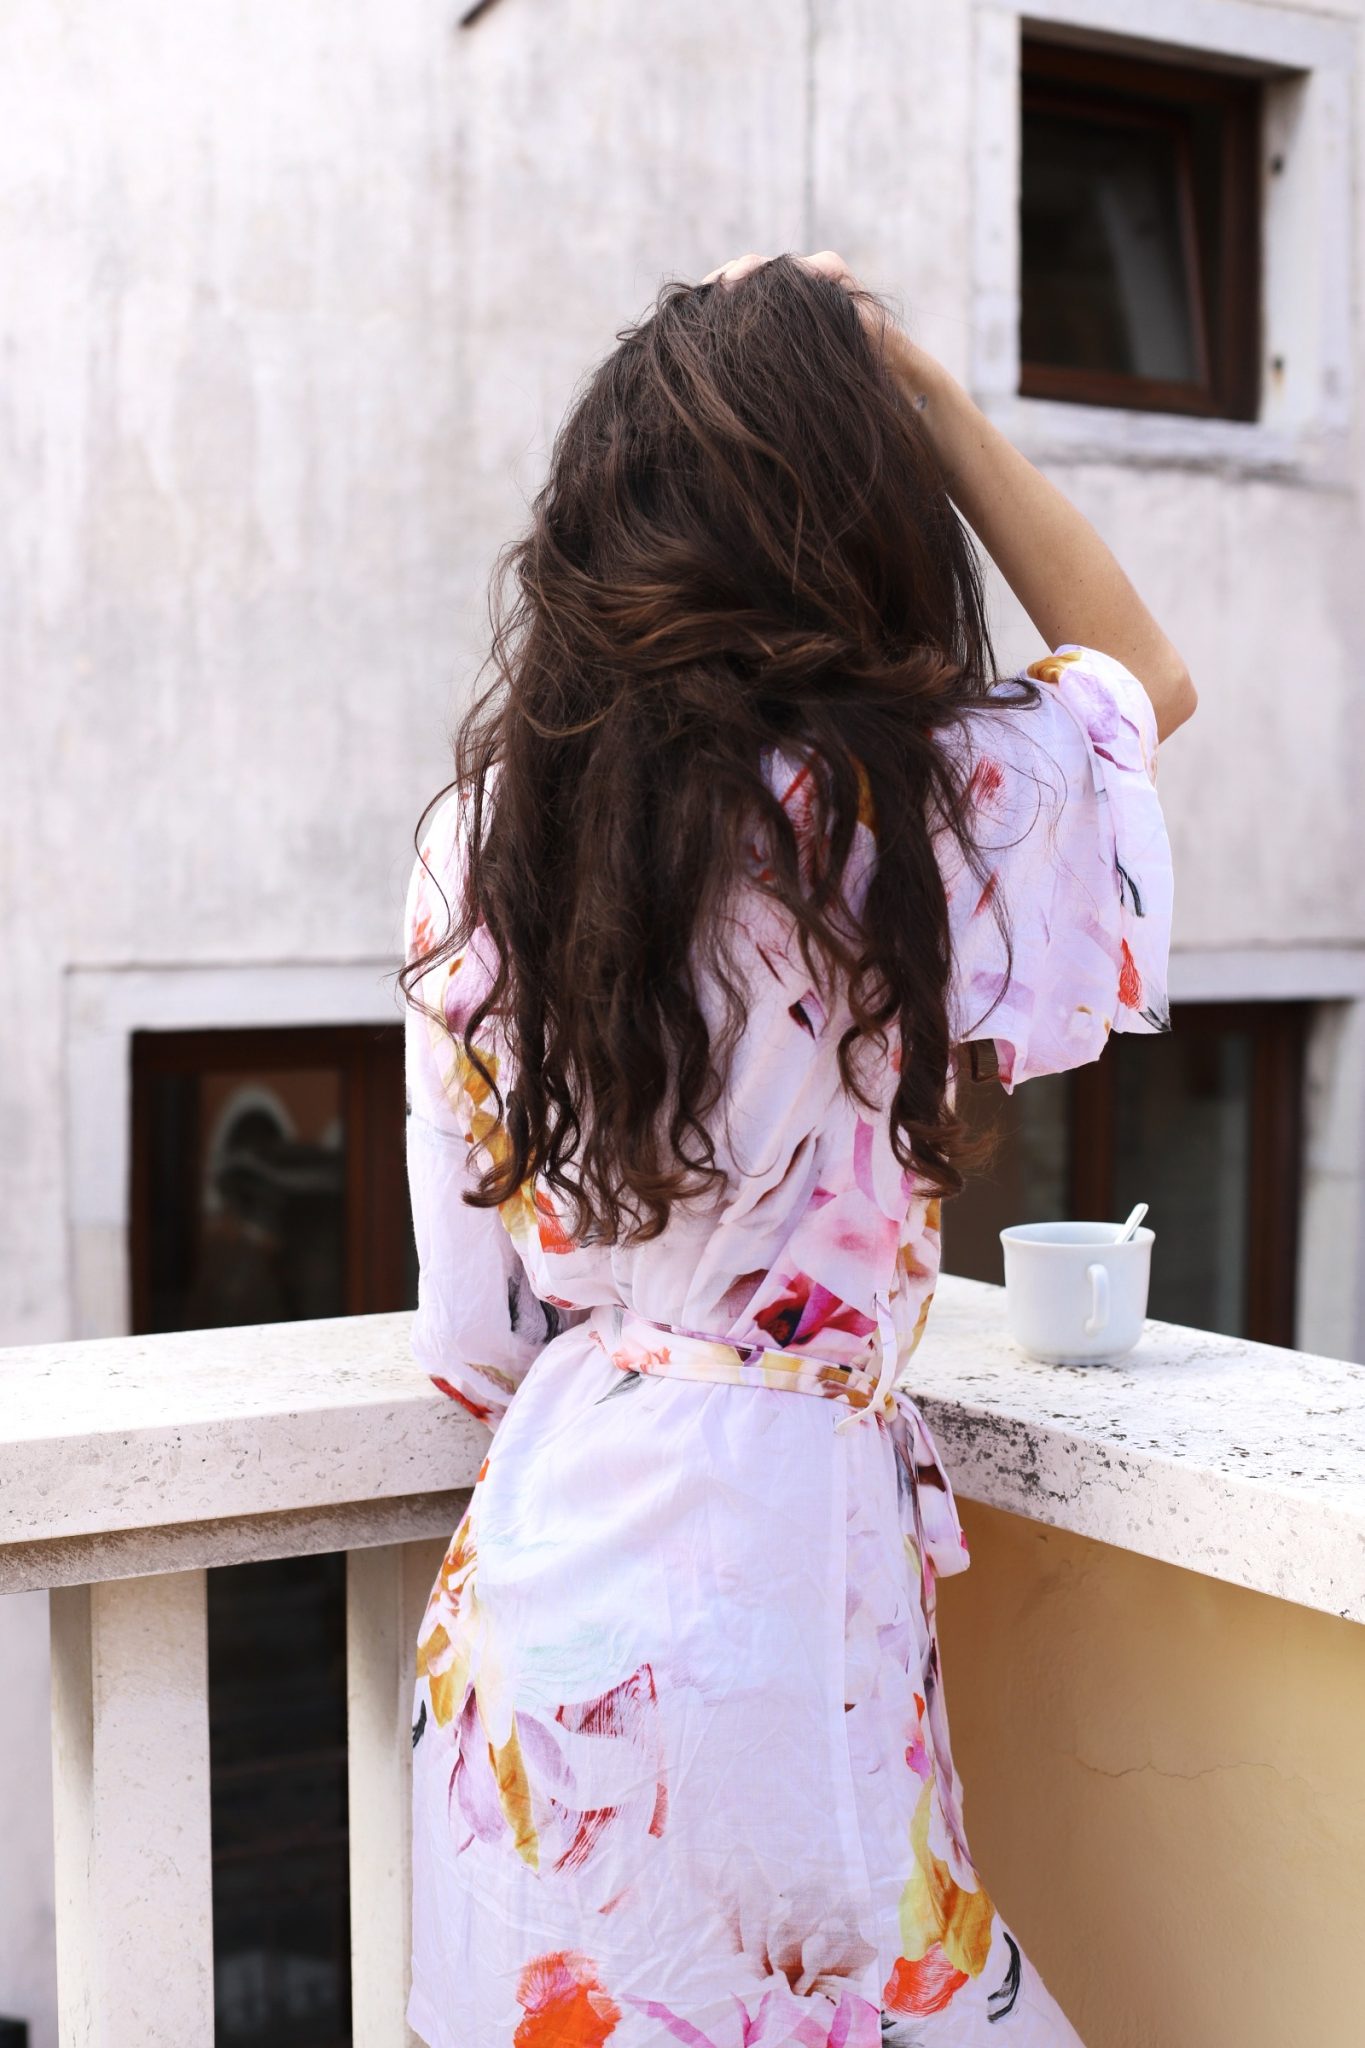 Best friends in Europe, Eurotrip, Venice, Venice Italy, European lifestyle, cute robes for bridesmaids, cute matching robes, floral robes, plum pretty sugar KIMONO STYLE. KNEE LENGTH ROBE. SHANGRI-LA., plum pretty sugar shangri-la kimono style robe, morning coffee, coffeenclothes